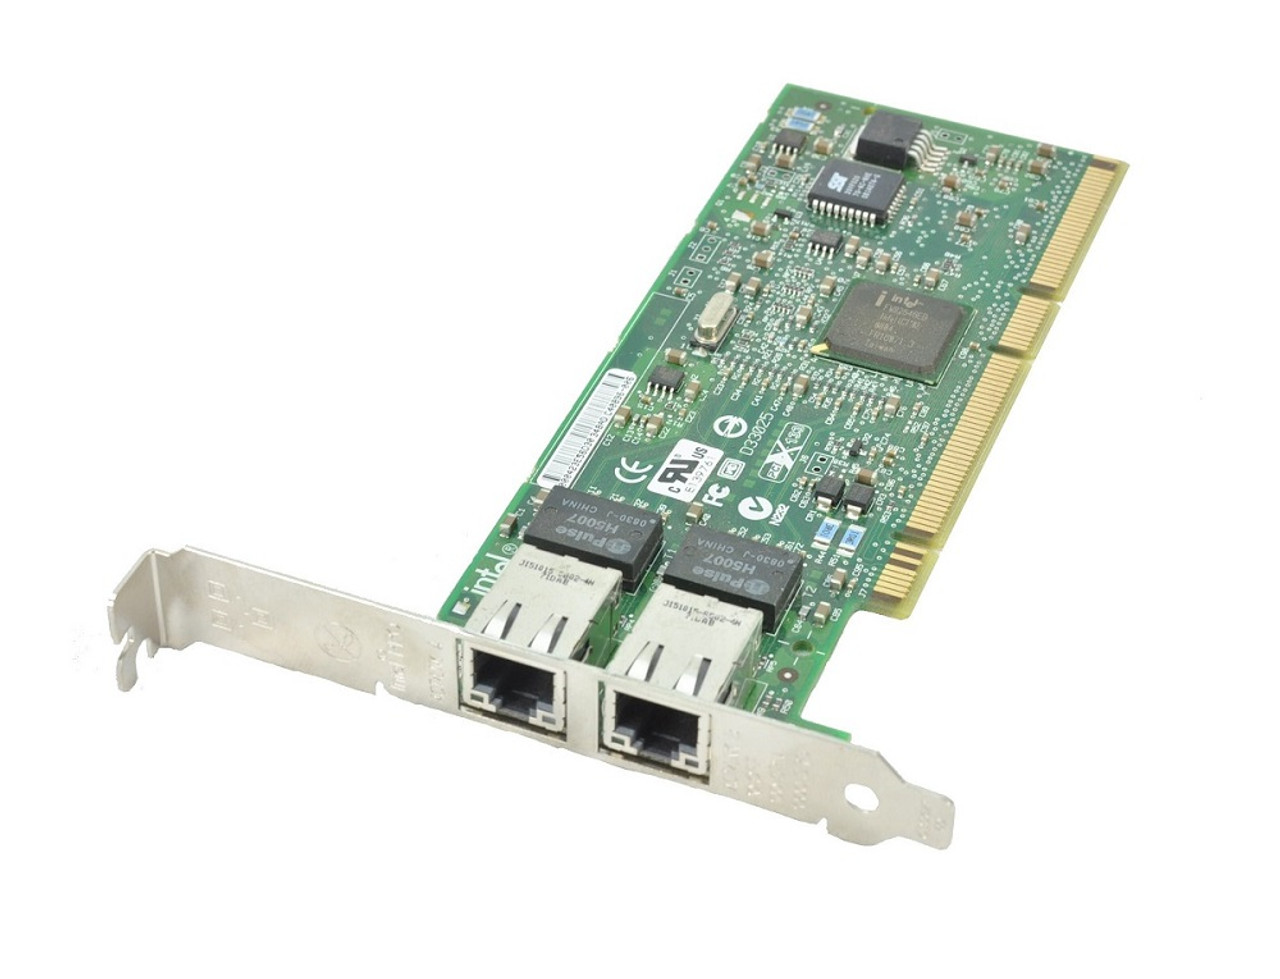 615732-B21 - HP PCI-Express x4 1GB 2-Port 332T Ethernet Network Adapter